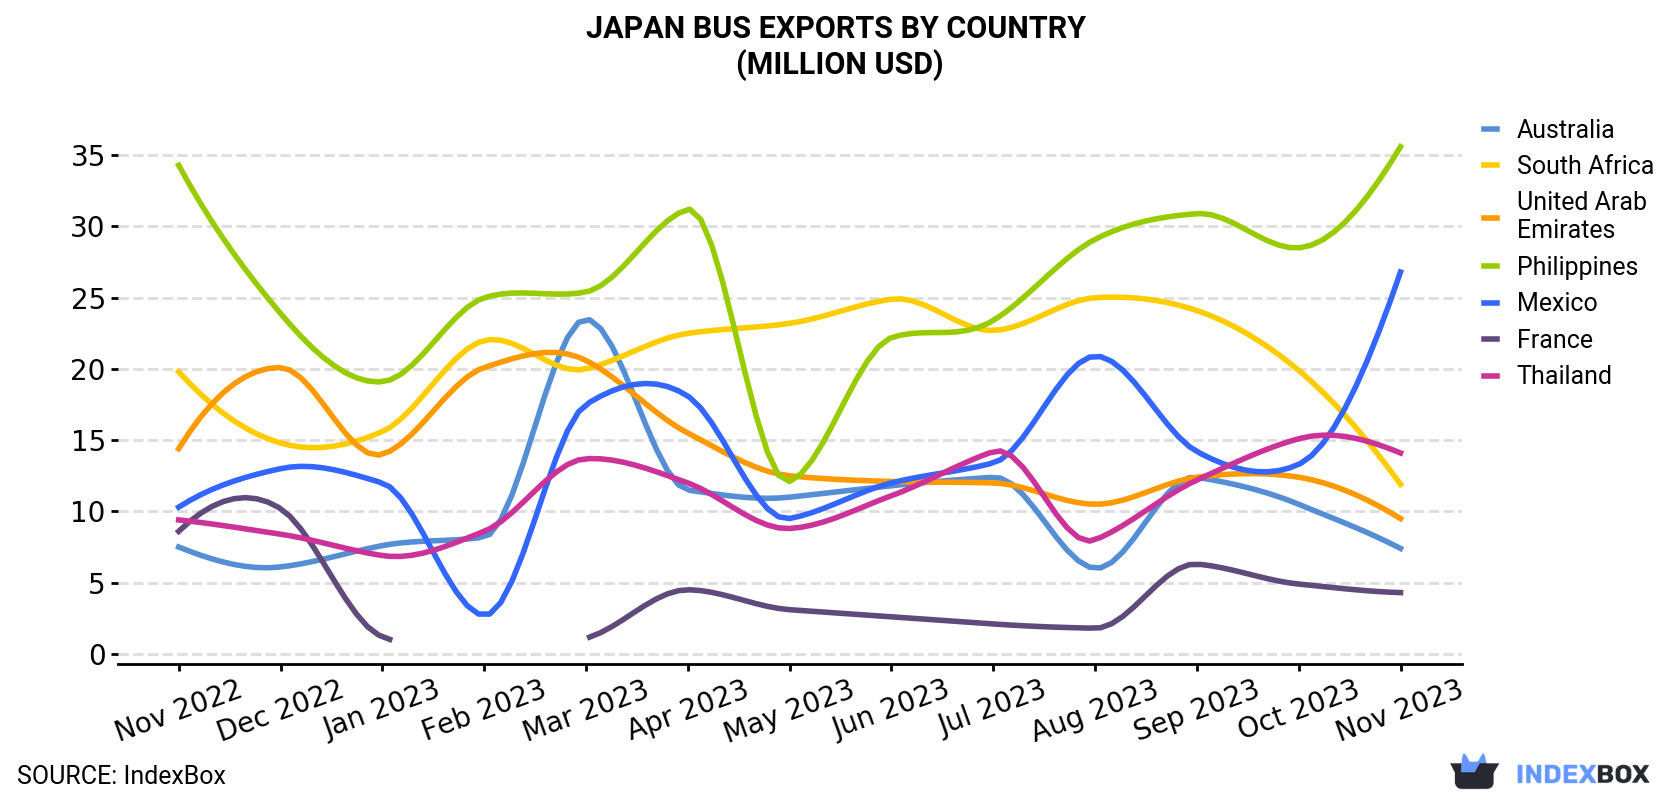 Japan Bus Exports By Country (Million USD)